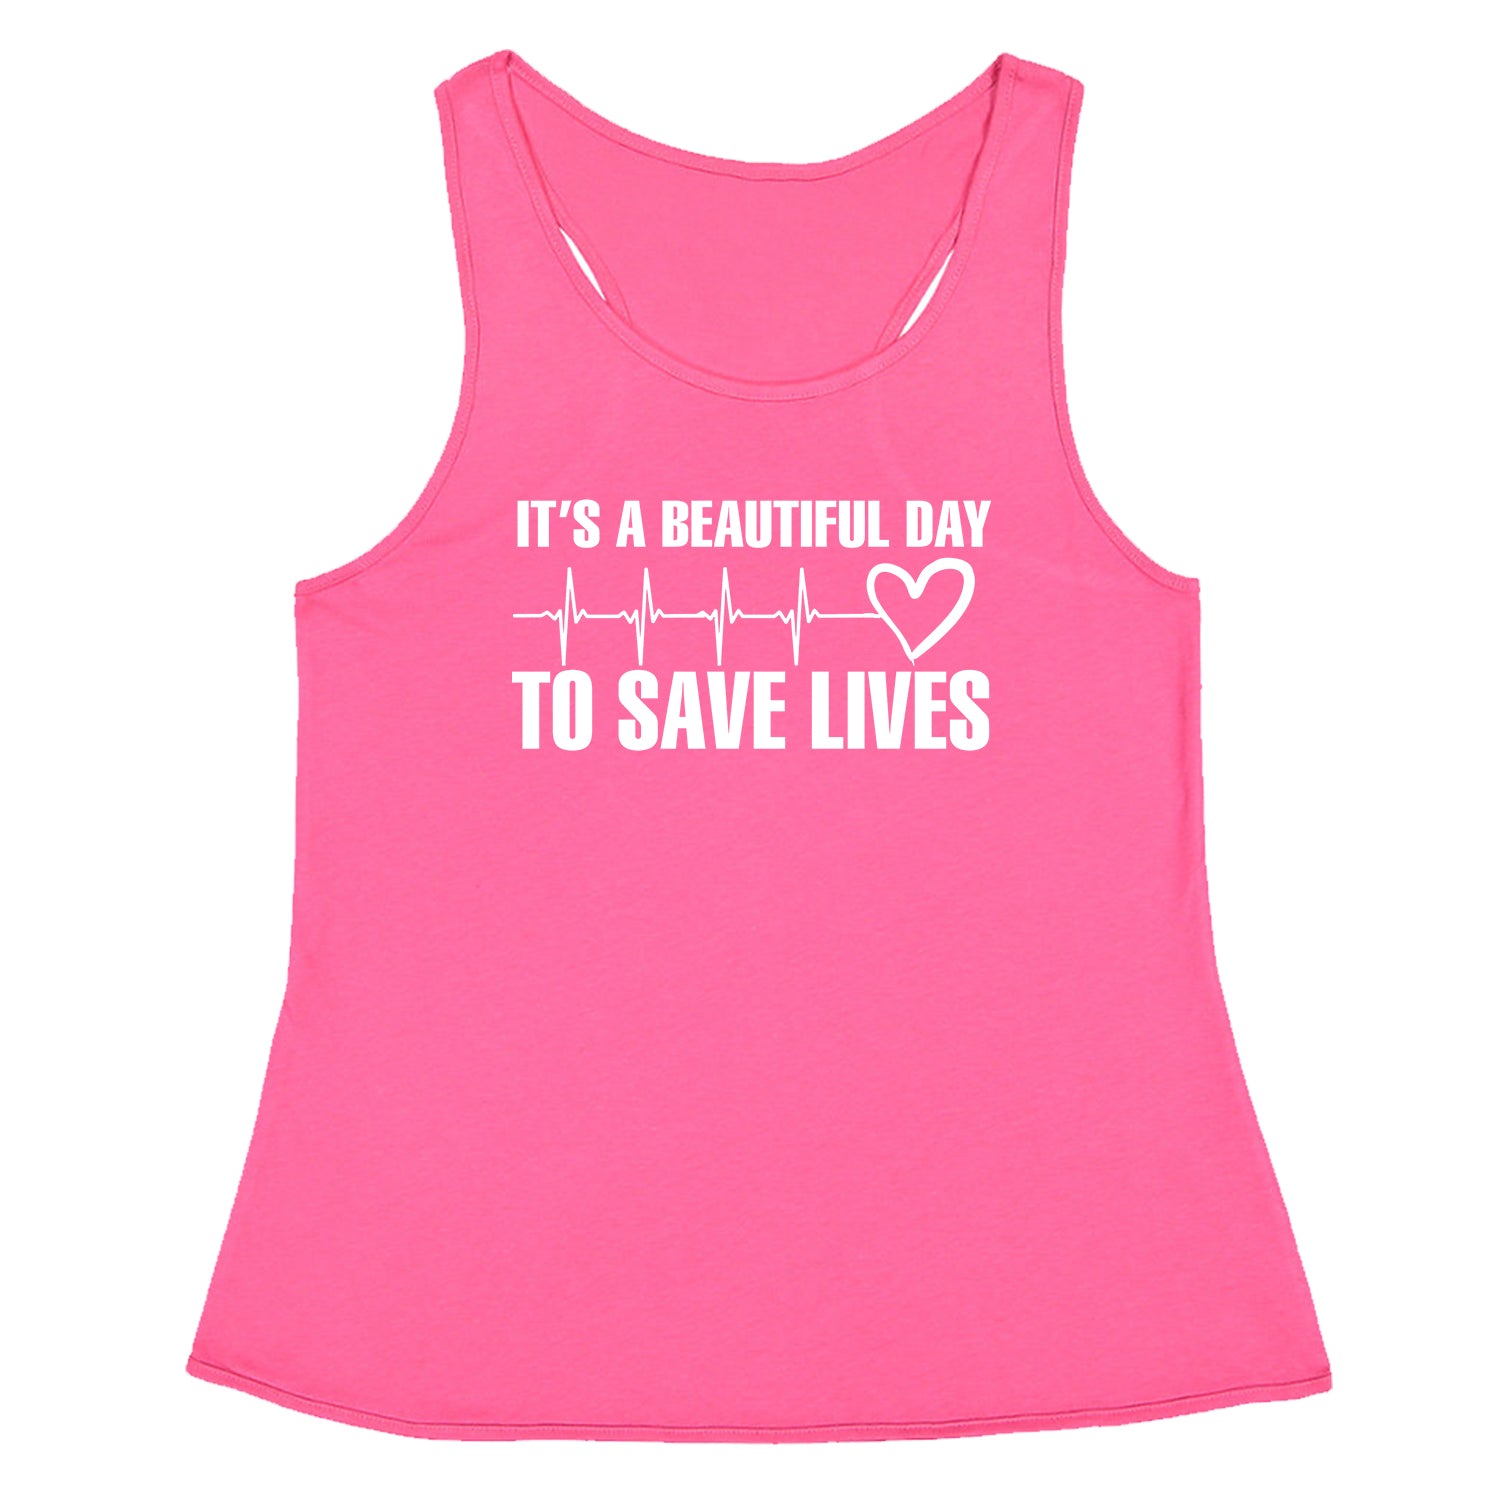 It's A Beautiful Day To Save Lives (White Print) Racerback Tank Top for Women #expressiontees by Expression Tees